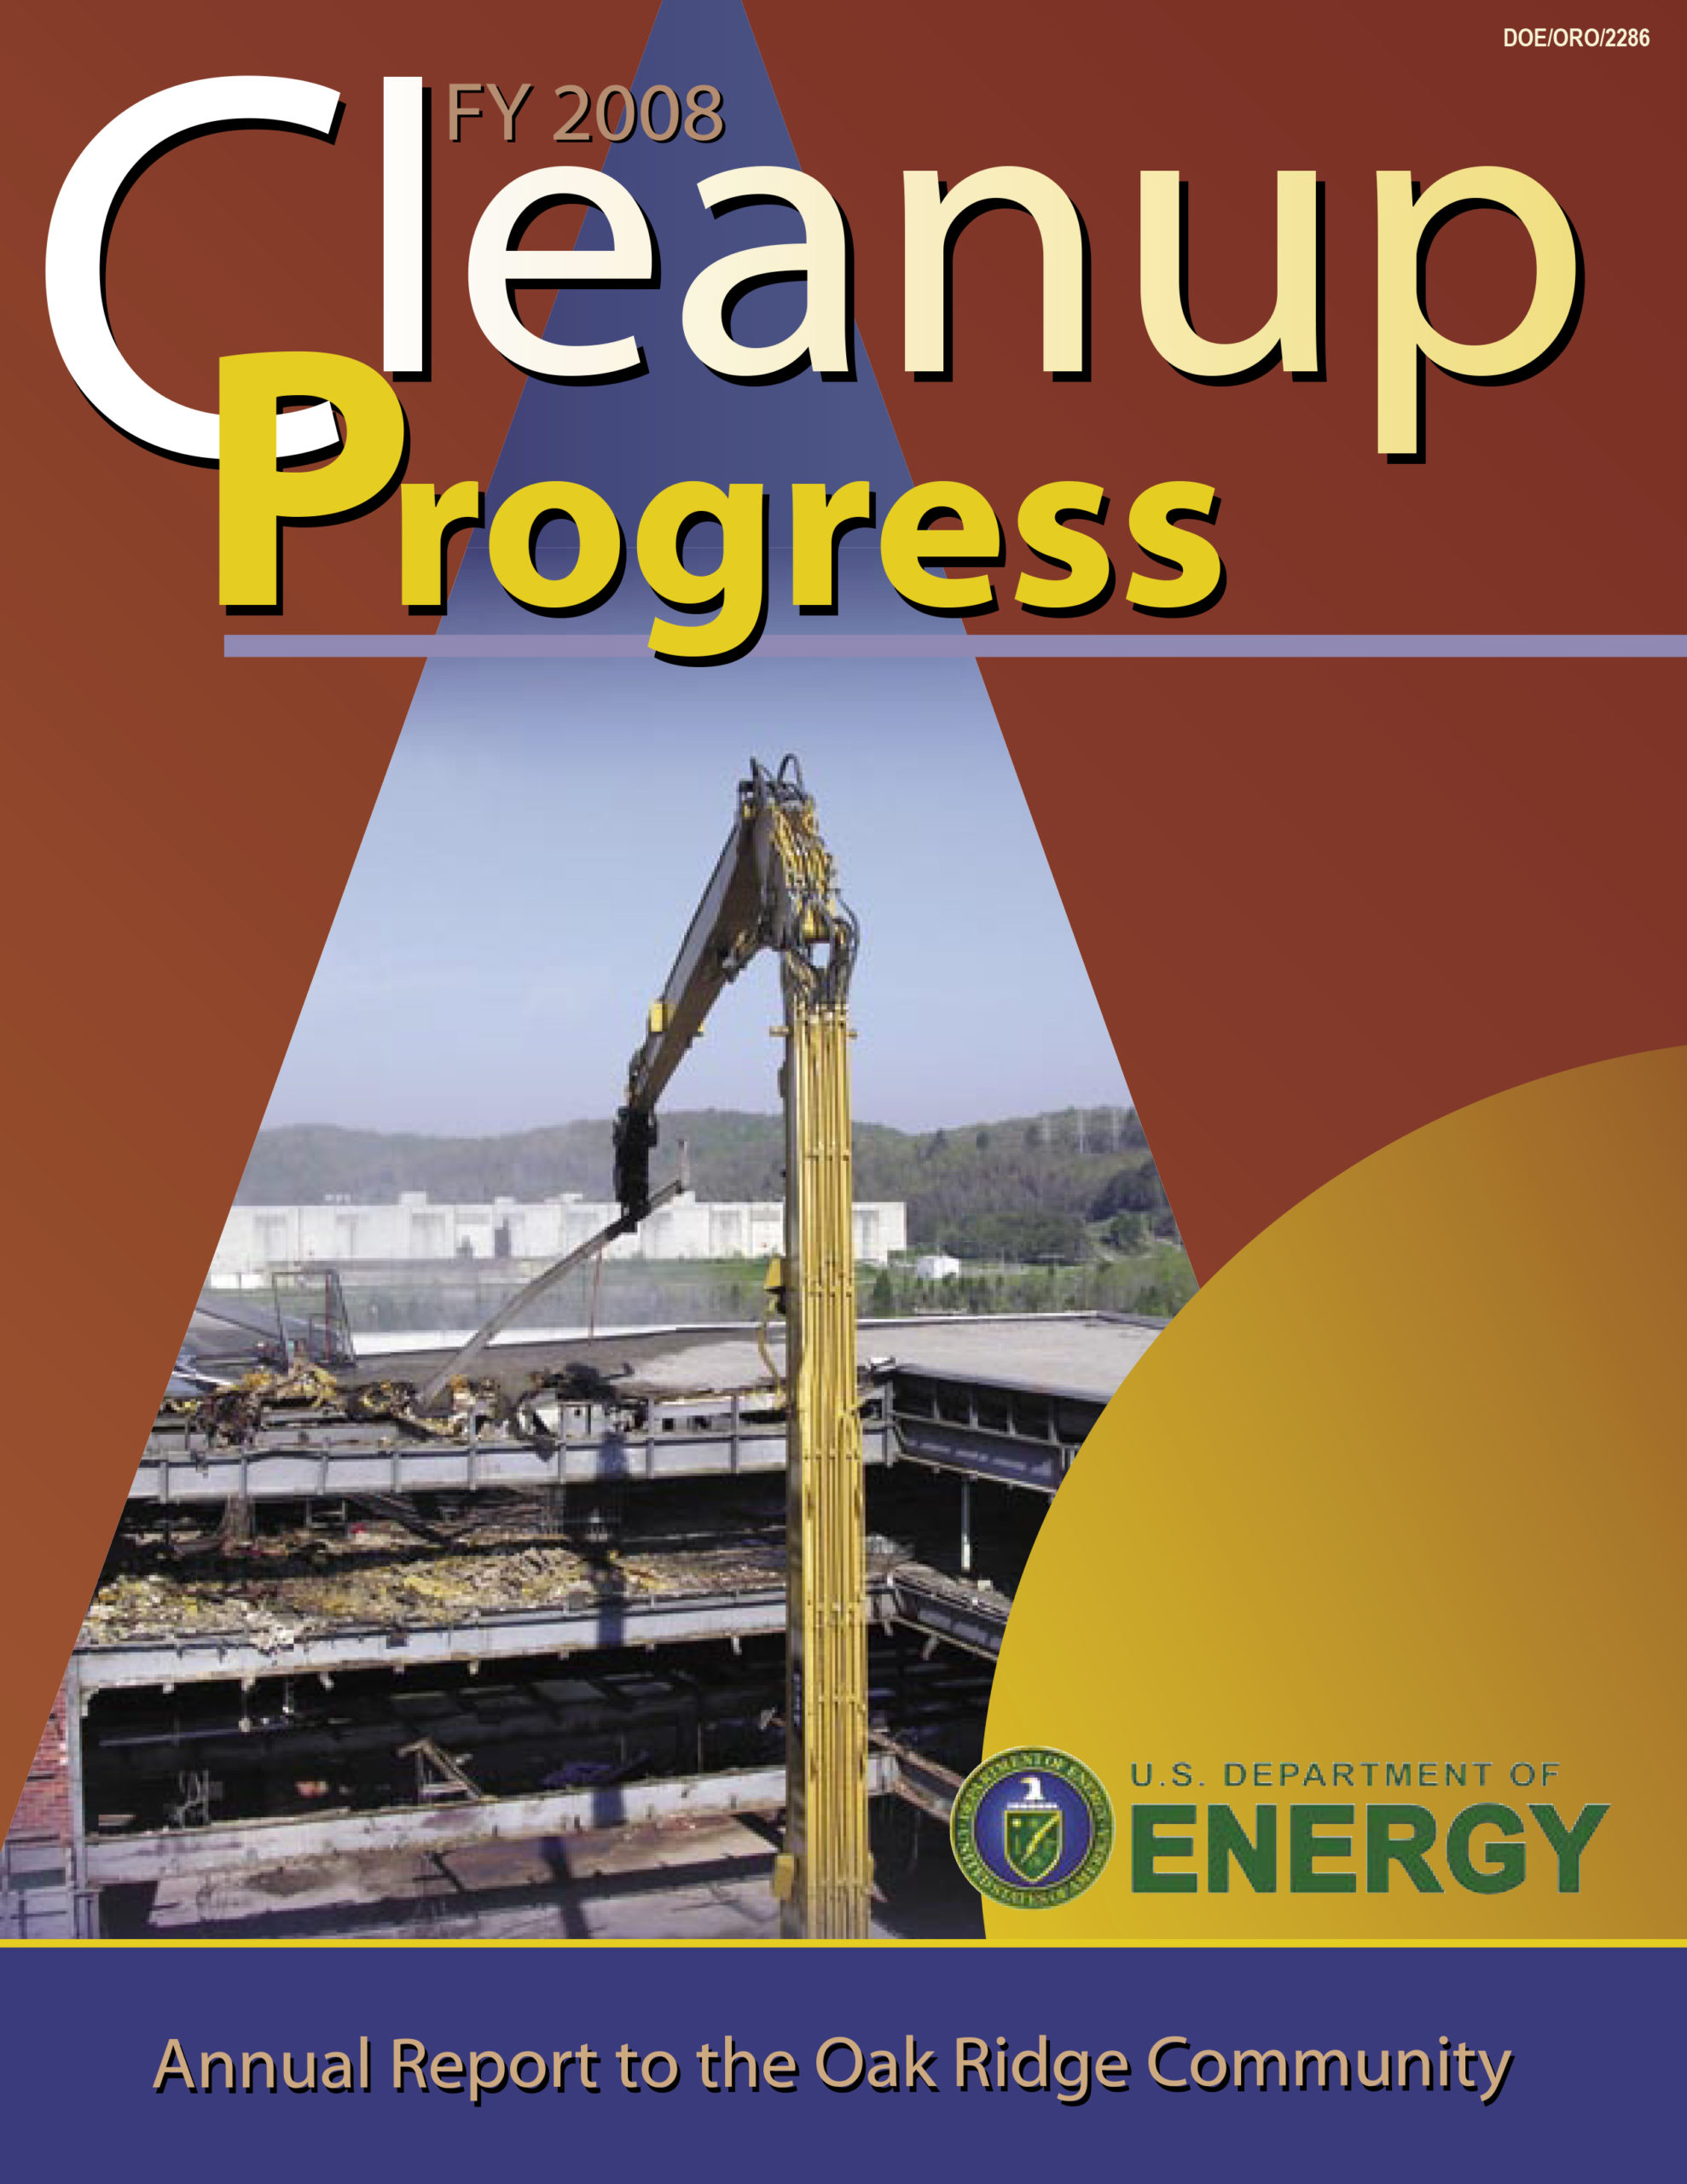 2008 Cleanup Progress cover